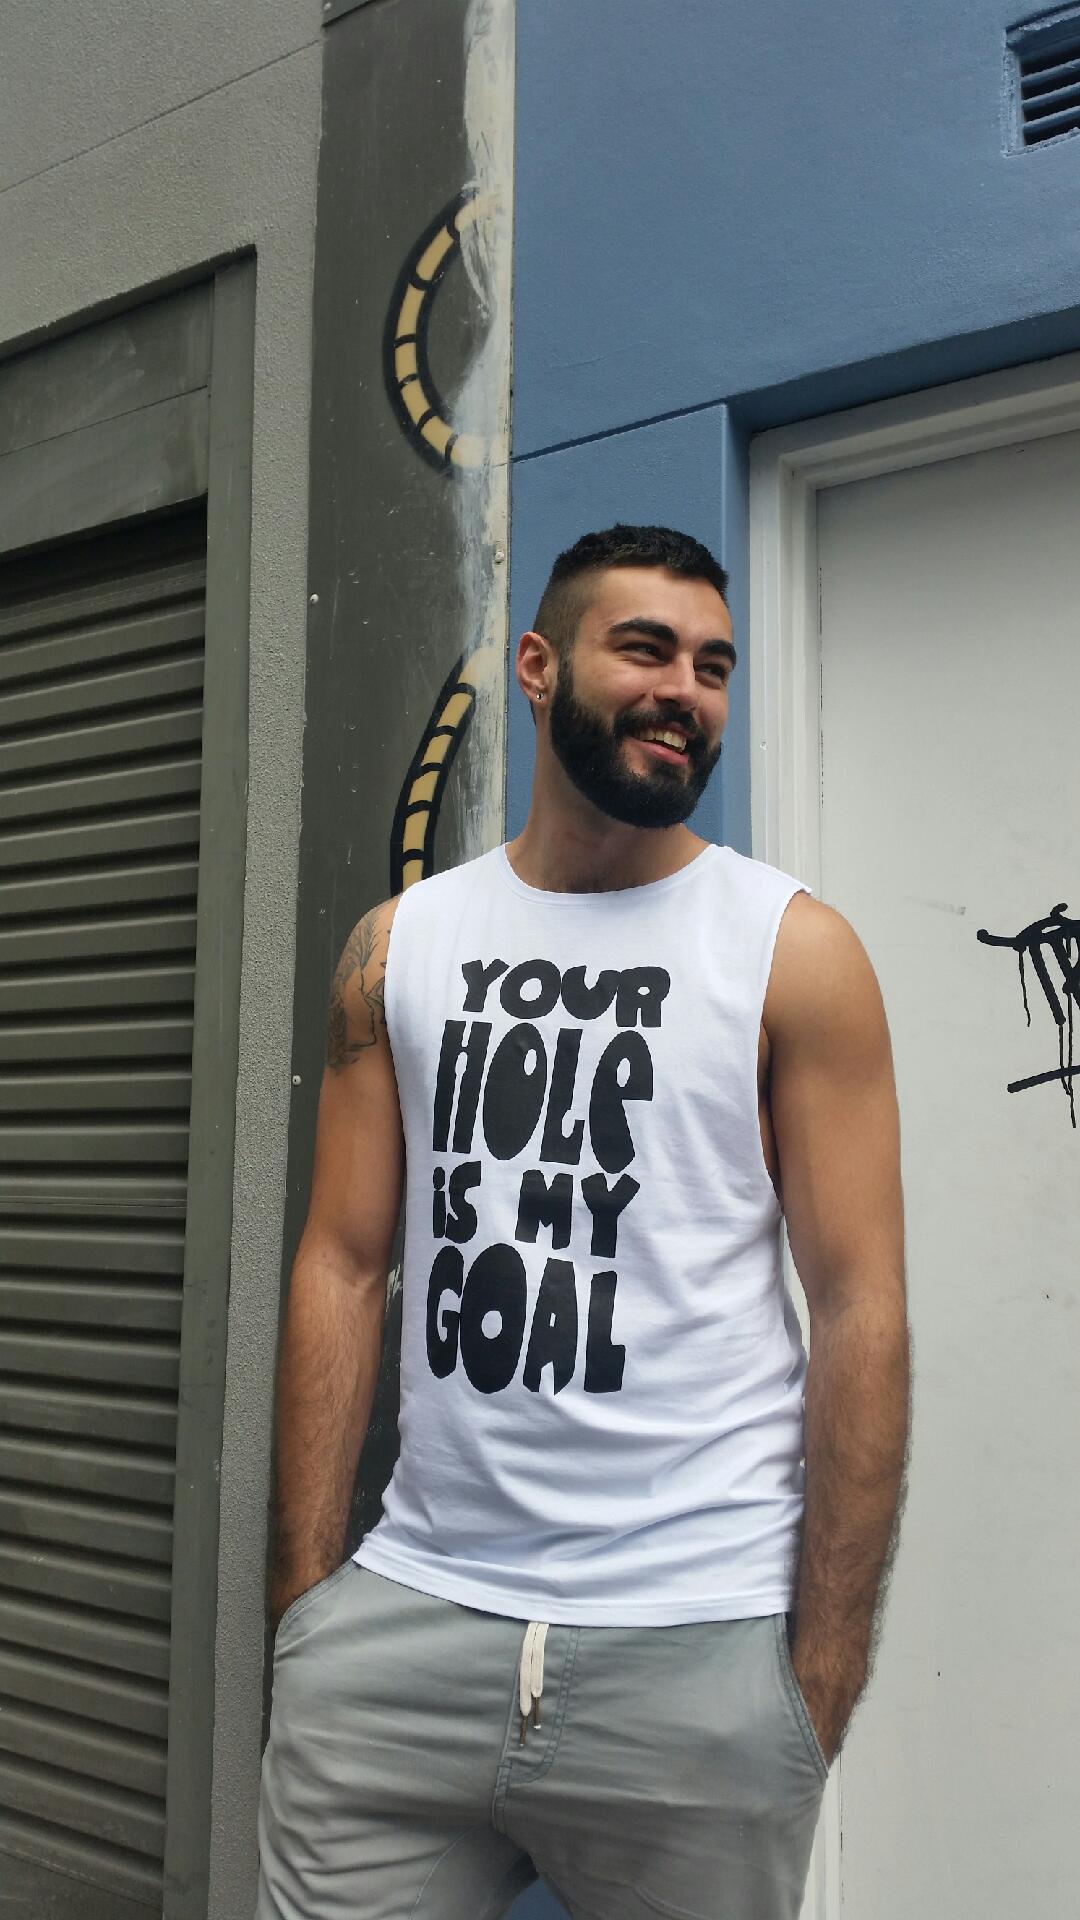 YOUR HOLE IS MY GOAL Tank Top by Dick Savvy